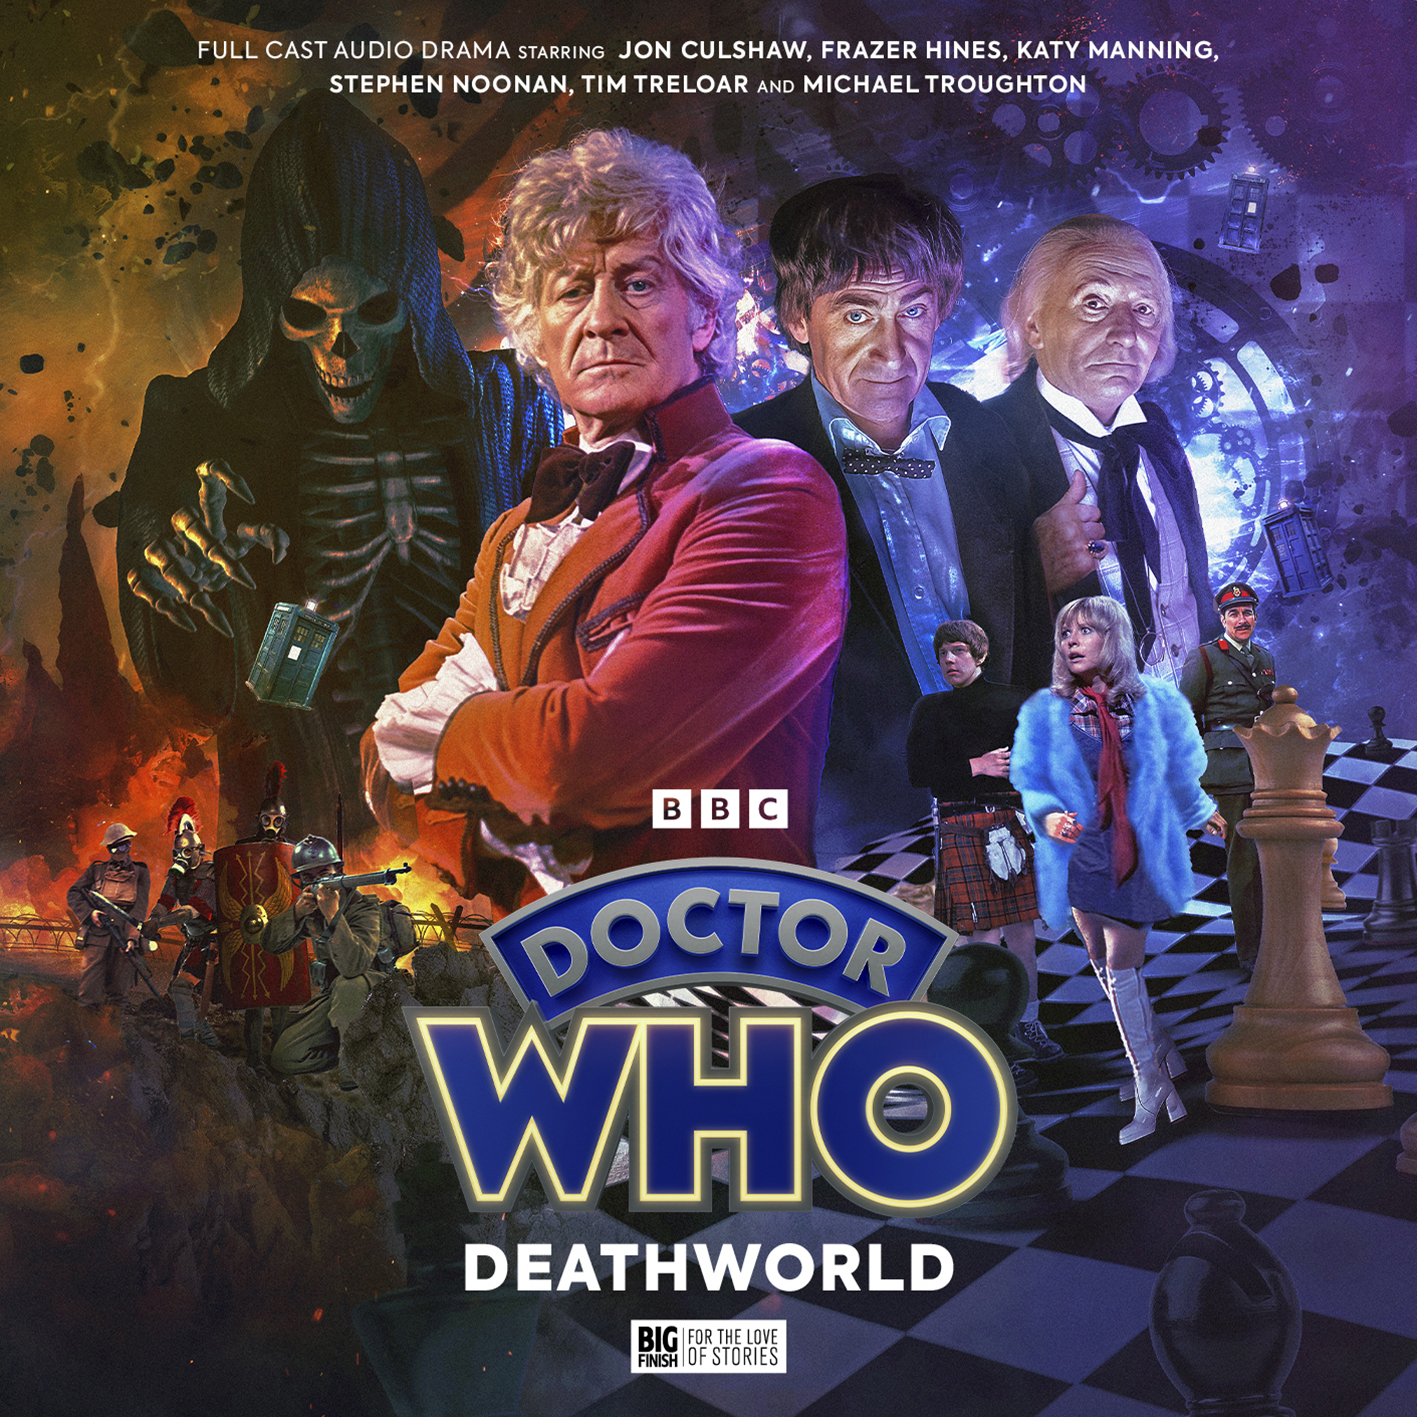 Doctor Who - The Lost Stories 8.1 Deathworld cover art